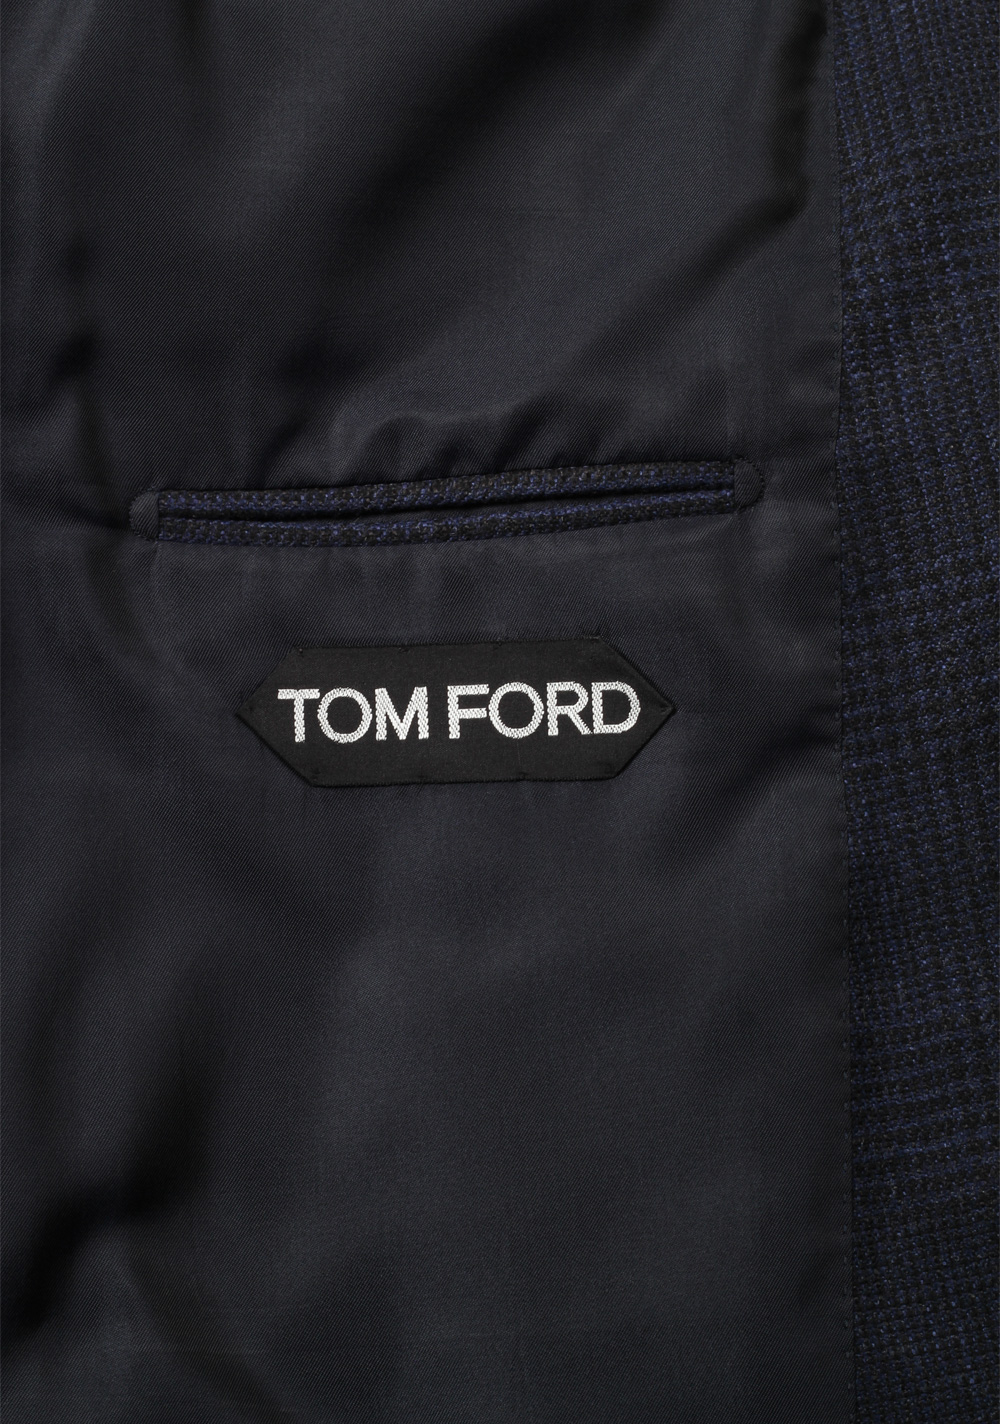 TOM FORD Shelton Checked Blue Sport Coat Size 52 / 42R U.S. In Cashmere Silk | Costume Limité